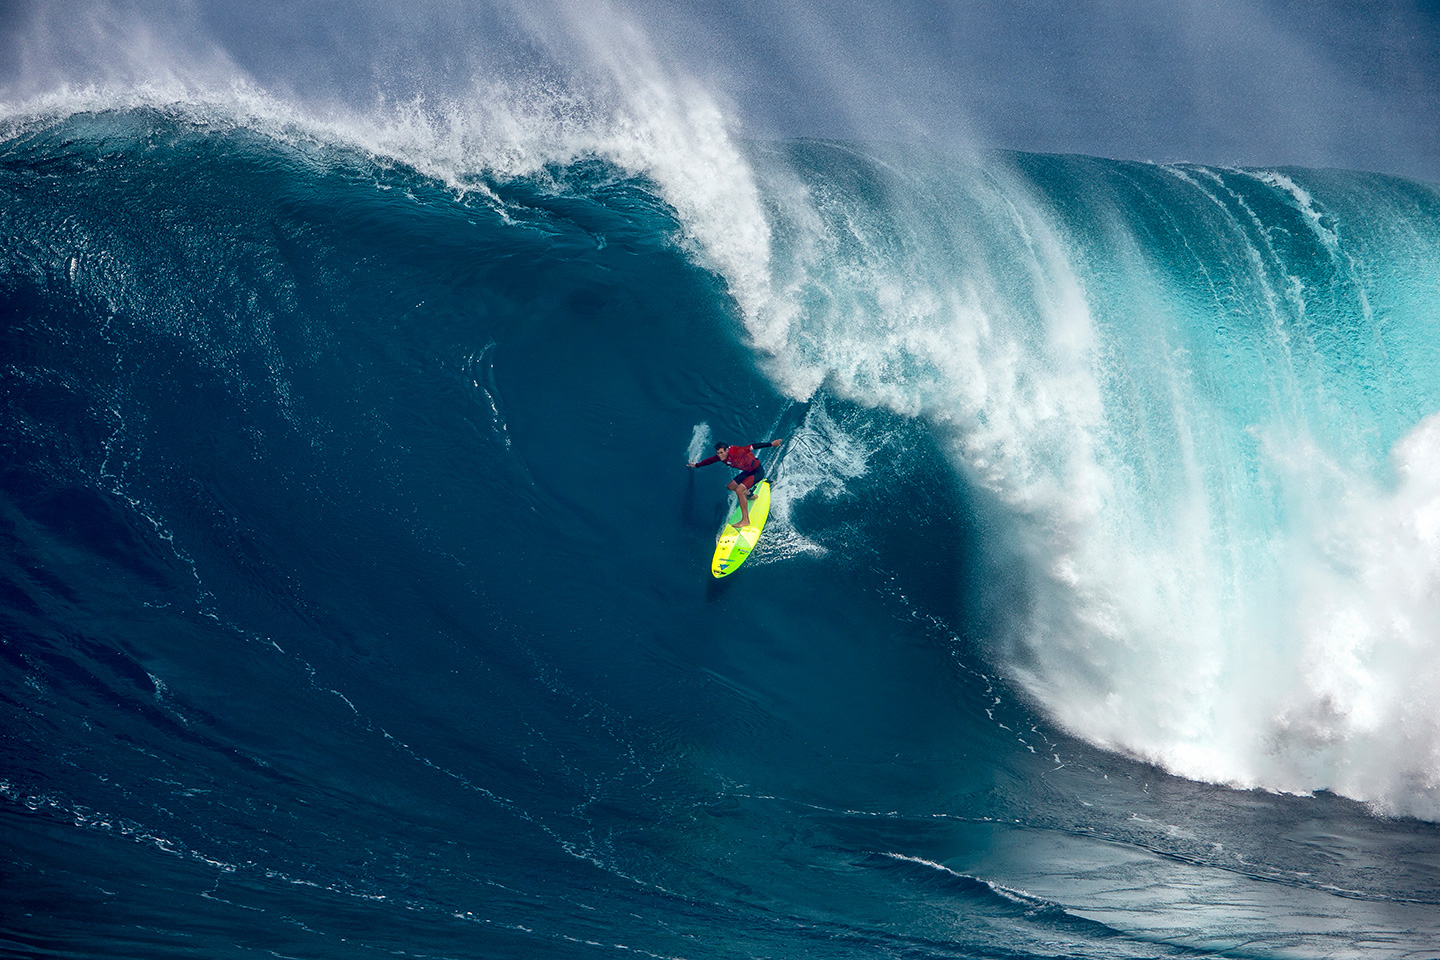 Peter Mel, Championship Big-Wave Surfer, on the Invention That Will Save Surfers' Lives